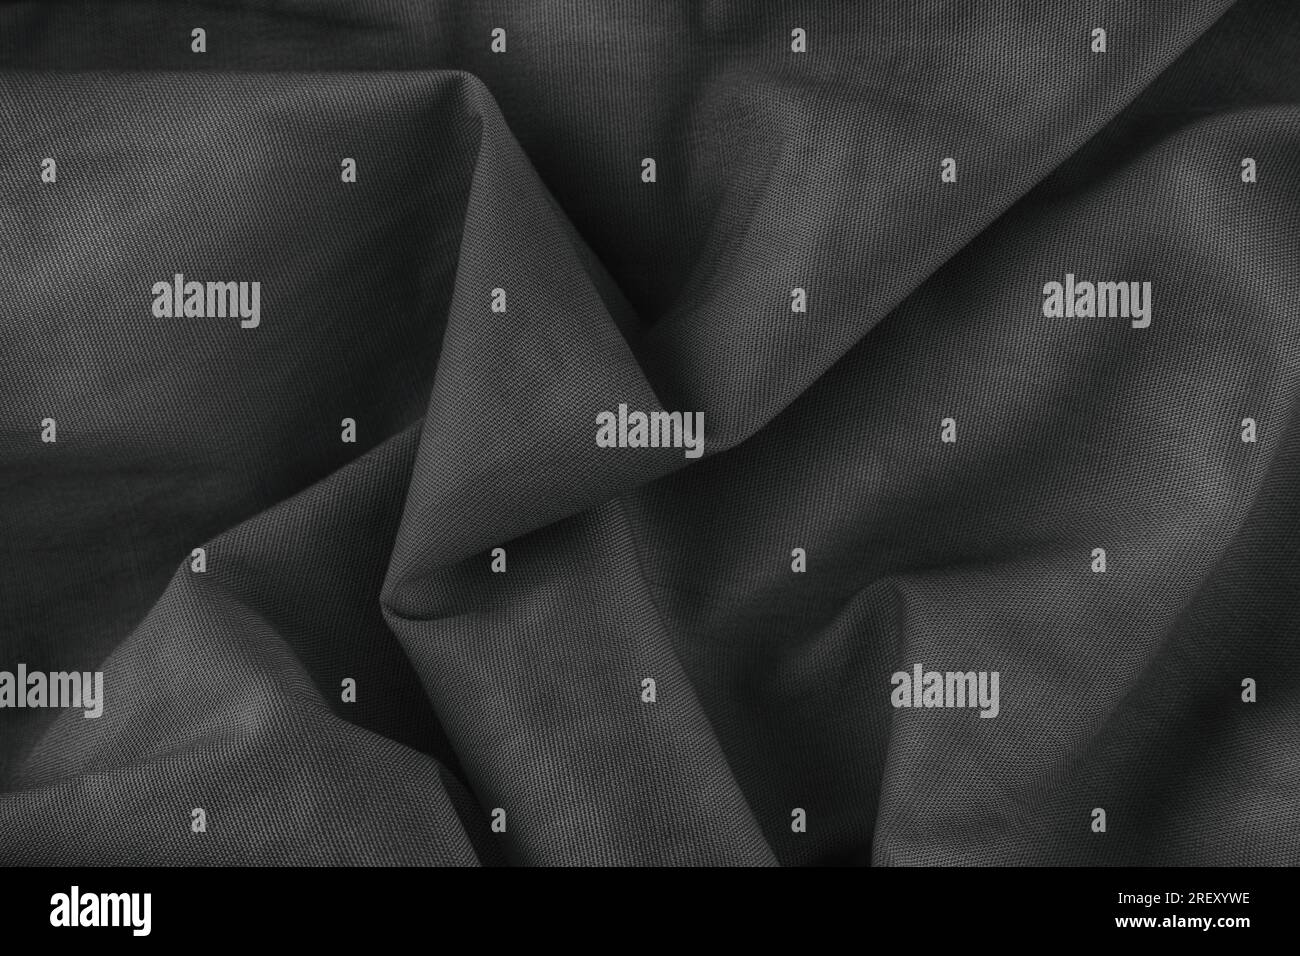 Folded fabric texture background. Black and white. Close up. Stock Photo